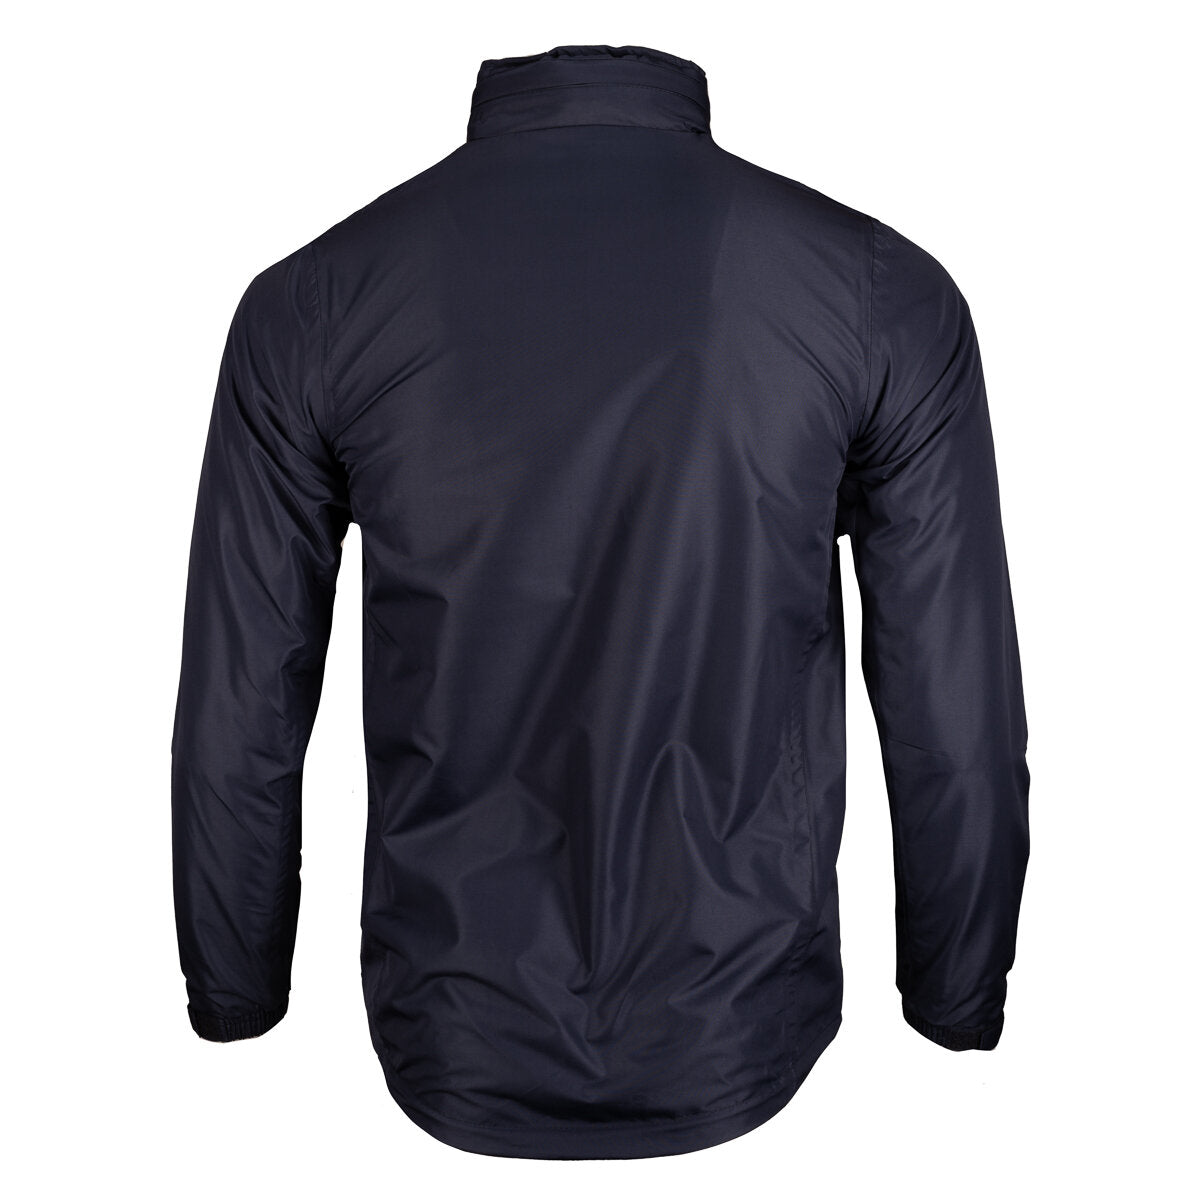 2022 - Shower Jacket - Navy - Adults - 2239